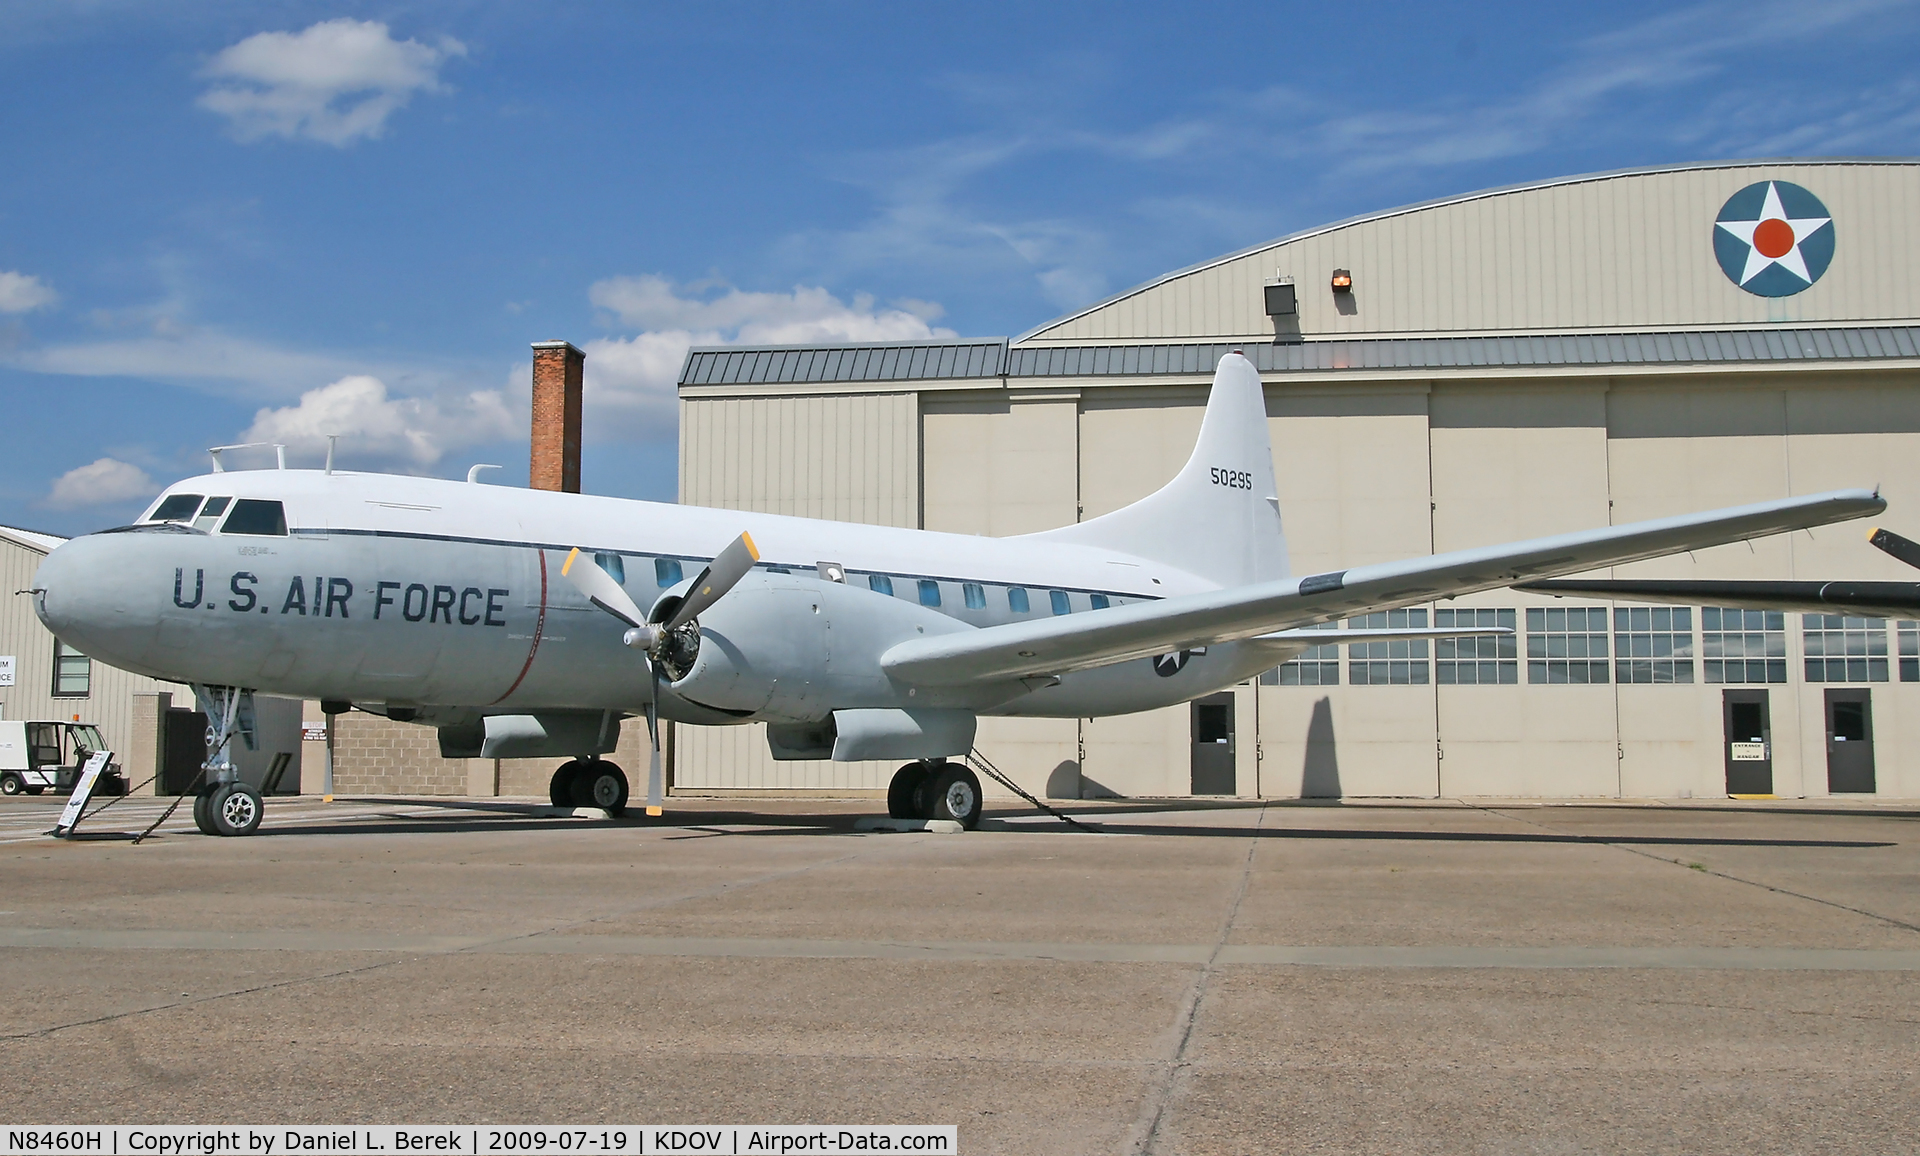 N8460H, 1955 Convair 340-79 C/N 223, This Convairliner has been preserved in USAF markings at the Air Mobility Command Museum, Dover, DE.